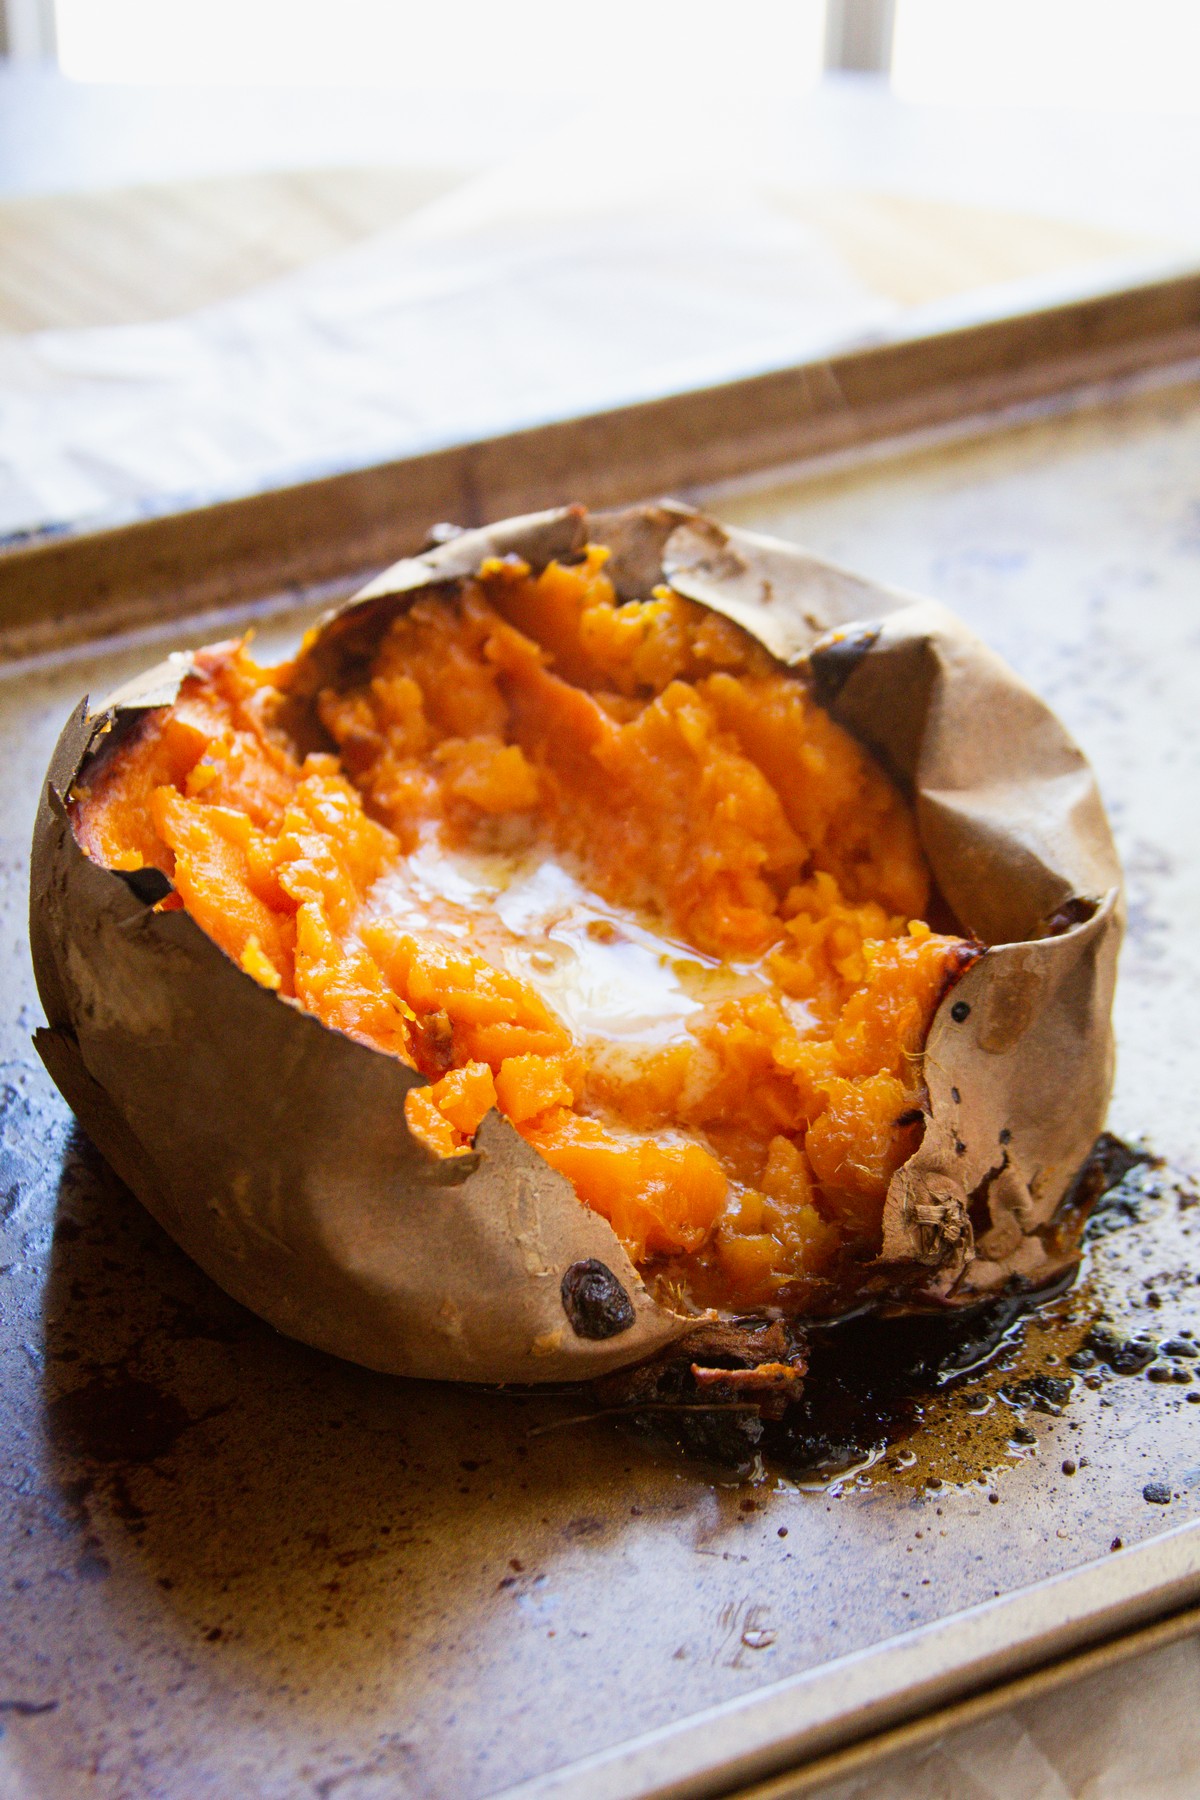 sweet potato with melted butter in center